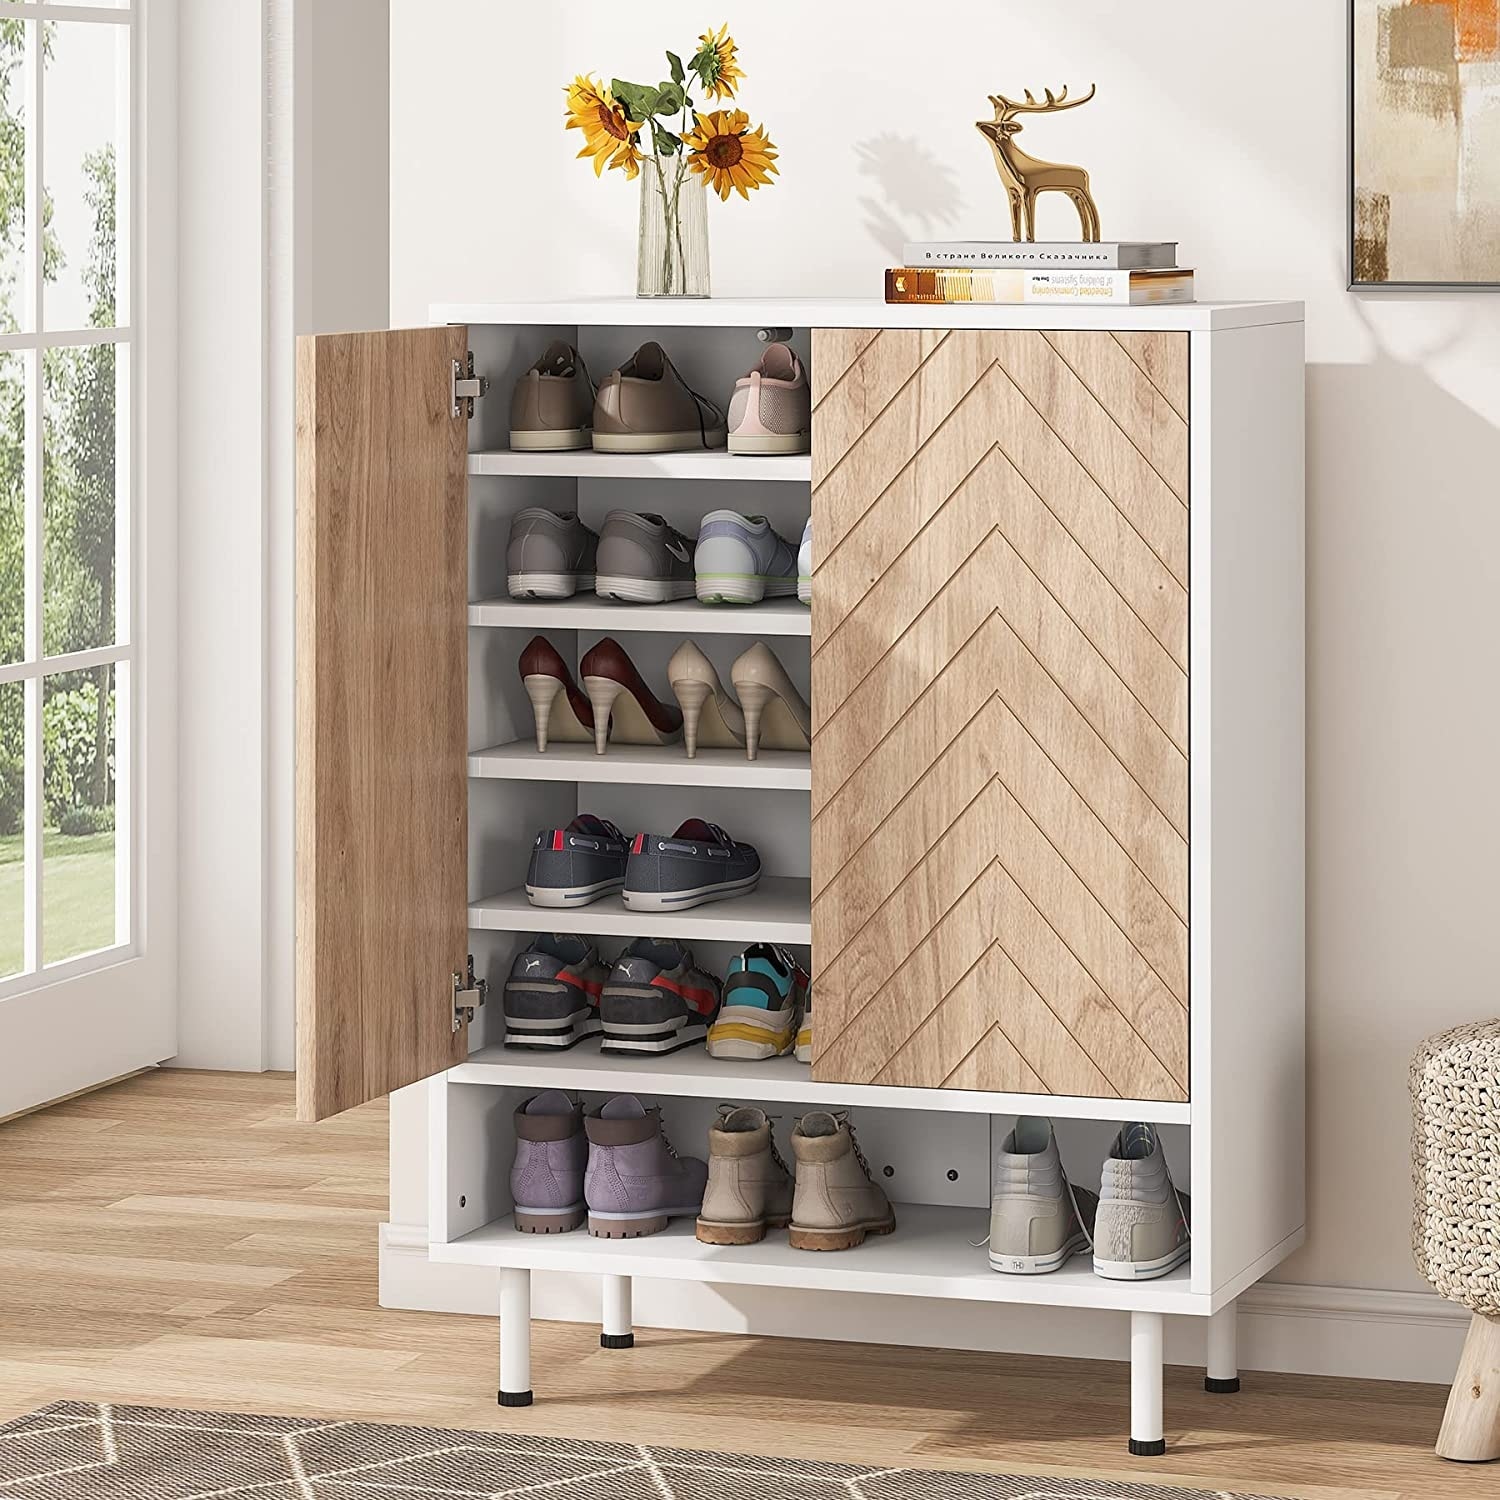 https://ak1.ostkcdn.com/images/products/is/images/direct/124c8f39b4d36834311c3cc0e5b7f8564127d62a/Modern-Shoe-Cabinet-18-Pair-Shoe-Rack-Organizer-Cabinet-with-Door.jpg